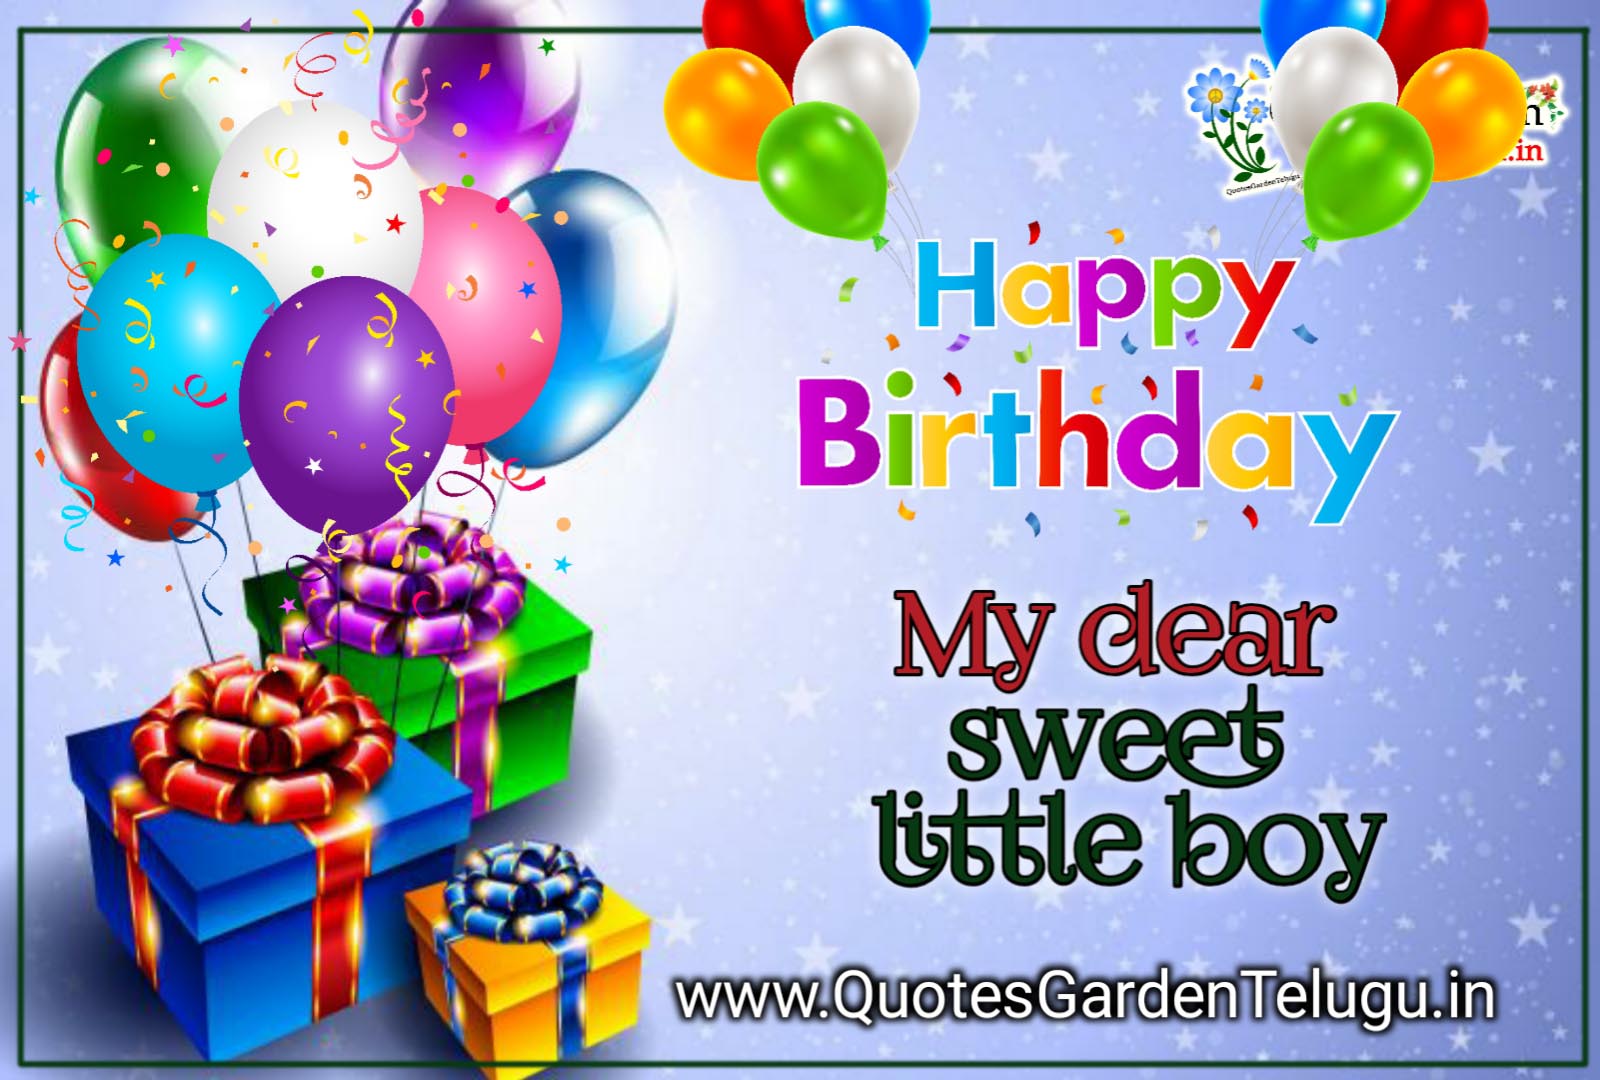 birthday wishes for small baby boy quotesgardentelugu | QUOTES ...